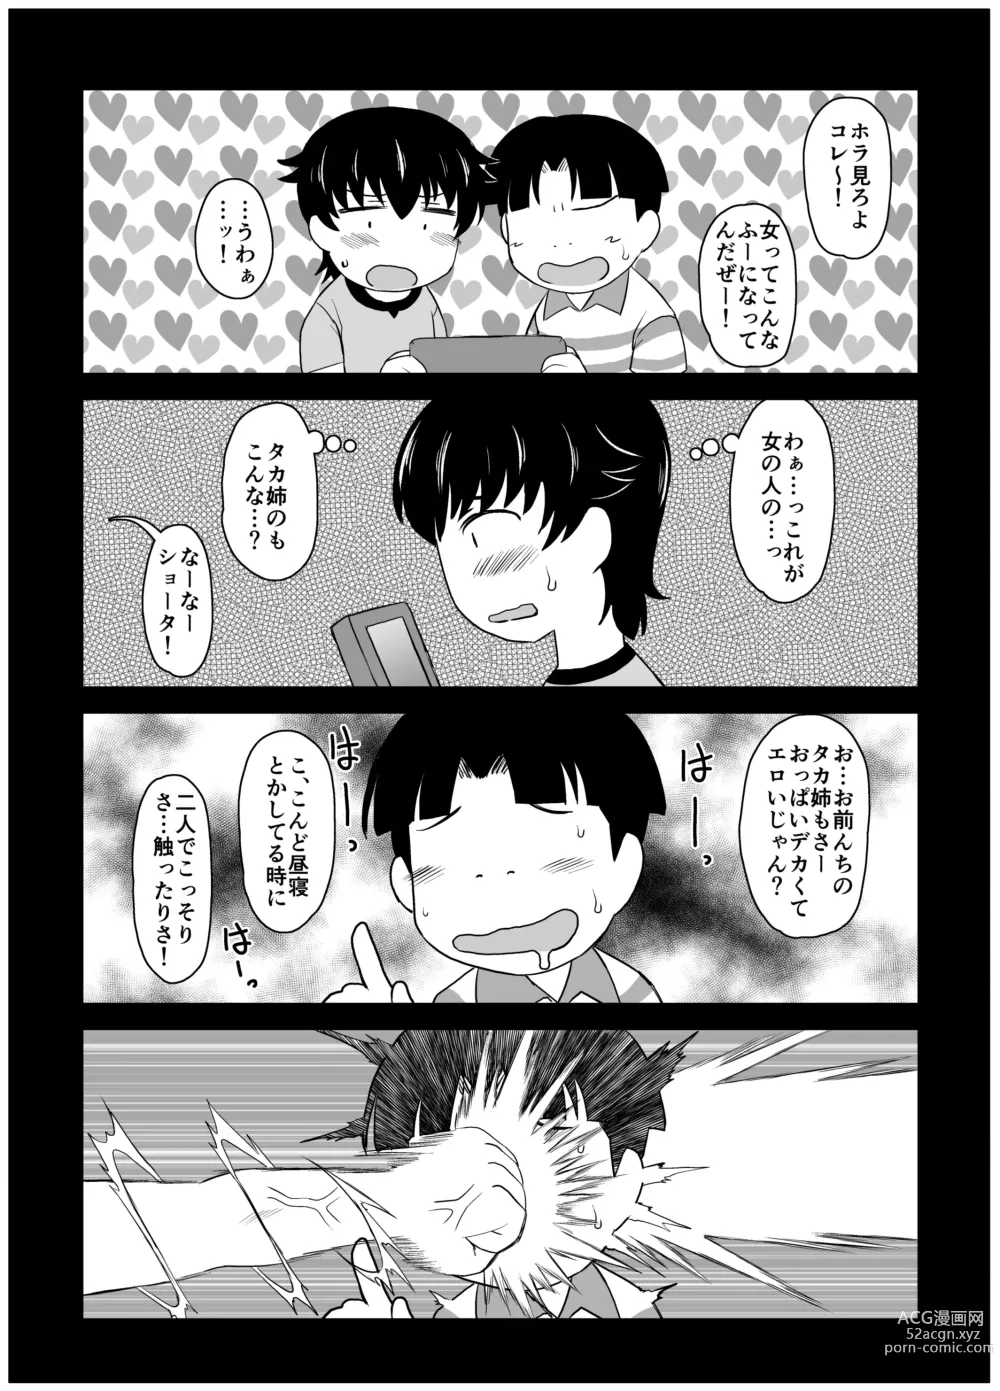 Page 7 of doujinshi Sister TR Anetorare-My favorite sister was stolen by him-DL increased version